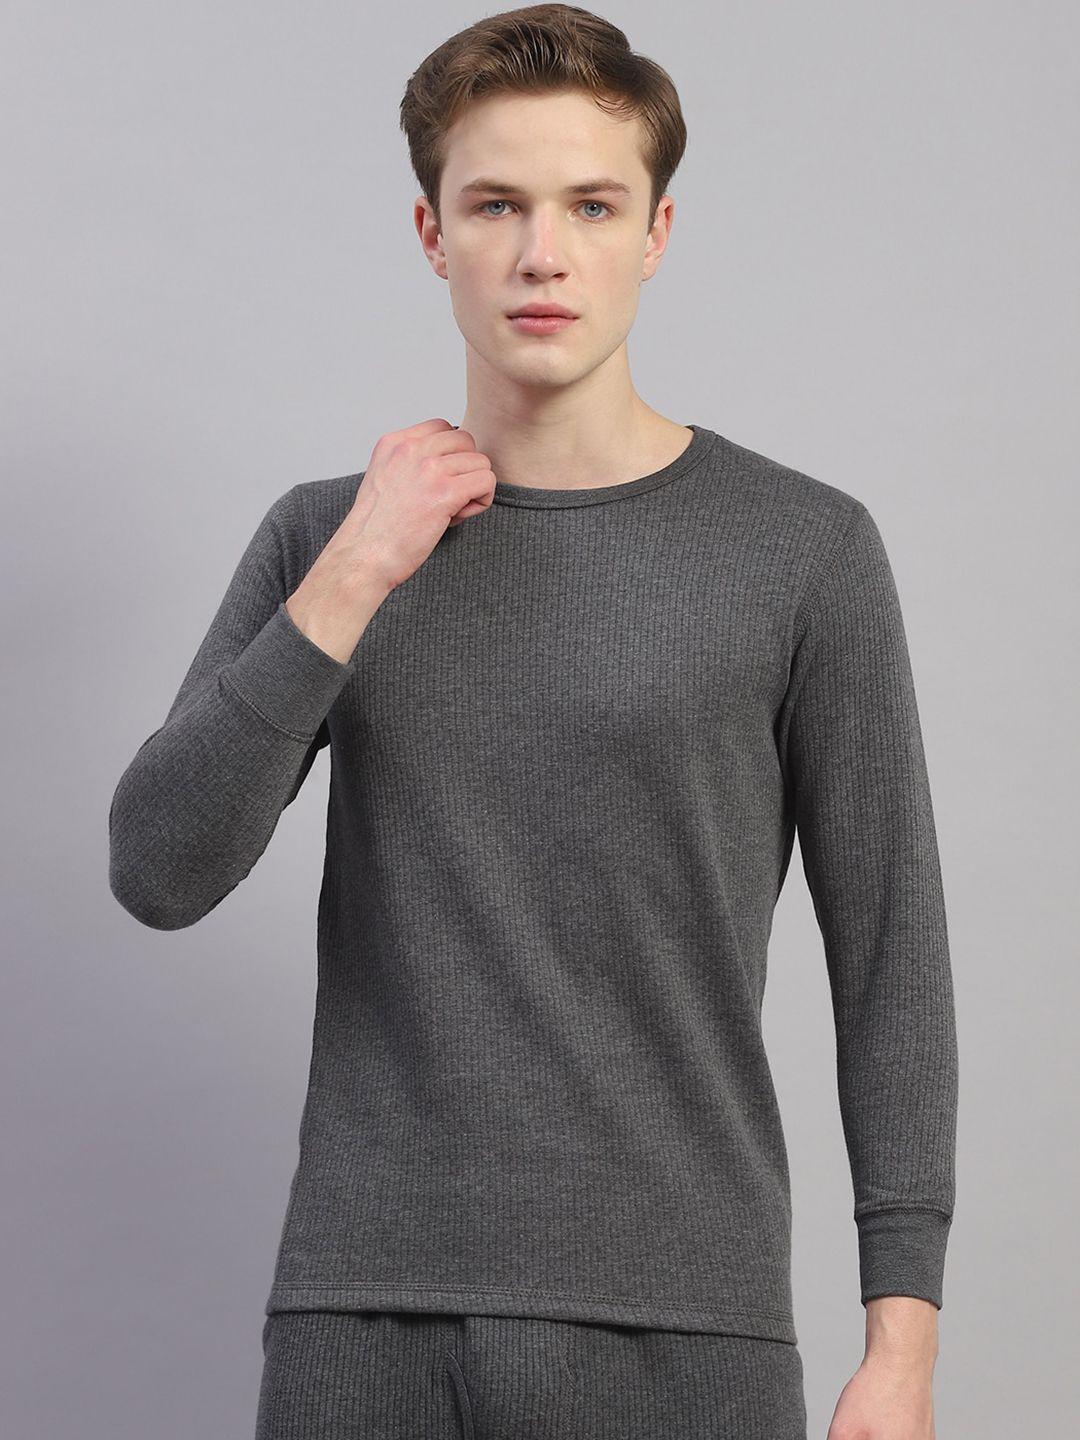 monte carlo ribbed cotton thermal tops